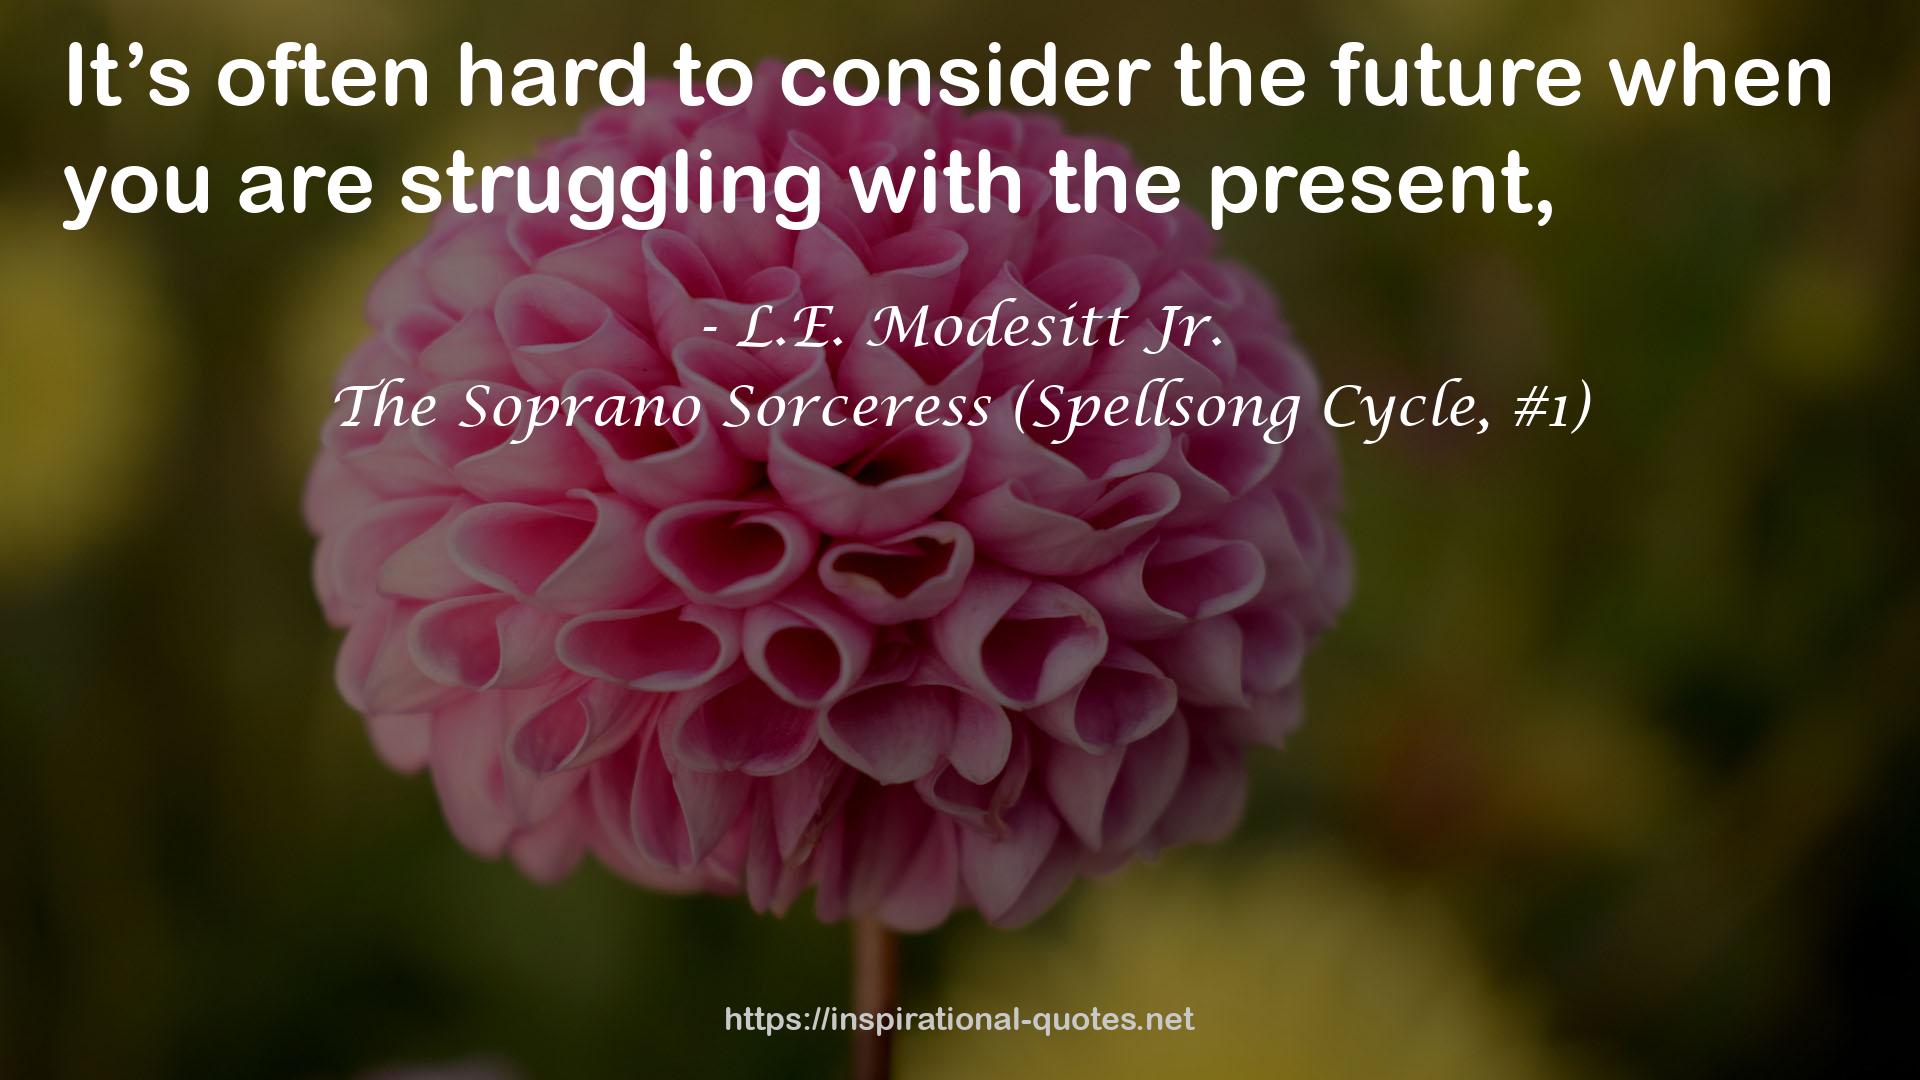 The Soprano Sorceress (Spellsong Cycle, #1) QUOTES